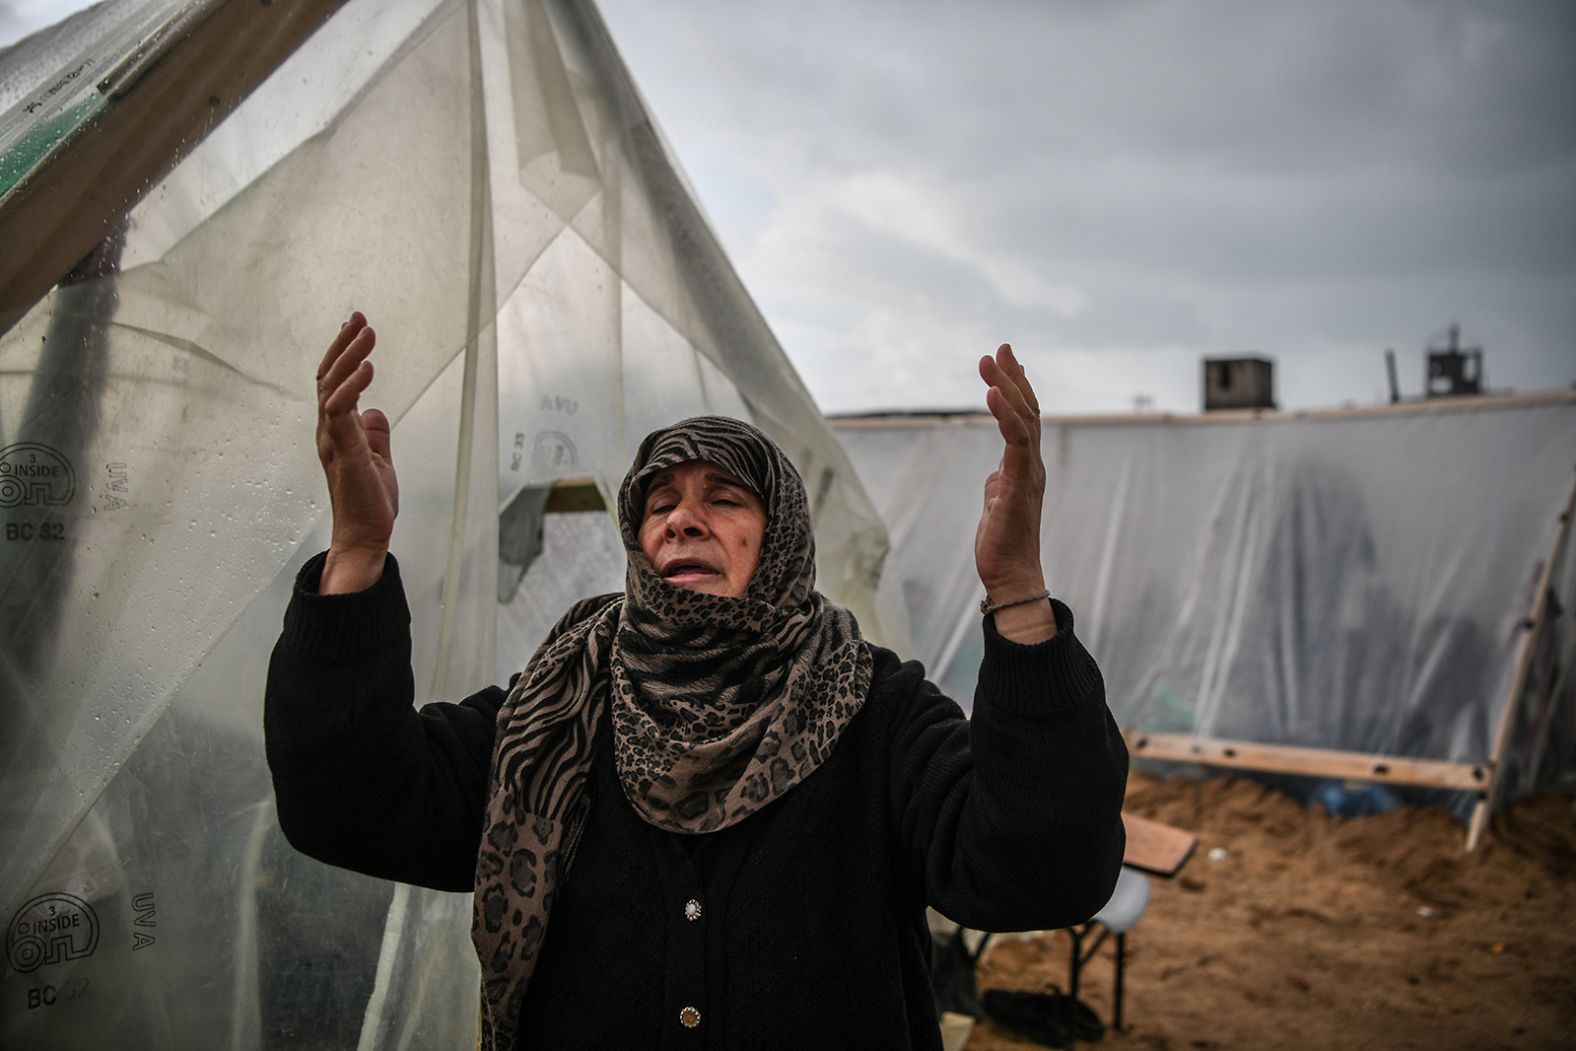 A Palestinian woman reacts as she walks past makeshift tents during a rainy day at a UN relief agency logistics base in Rafah, Gaza on December 13.